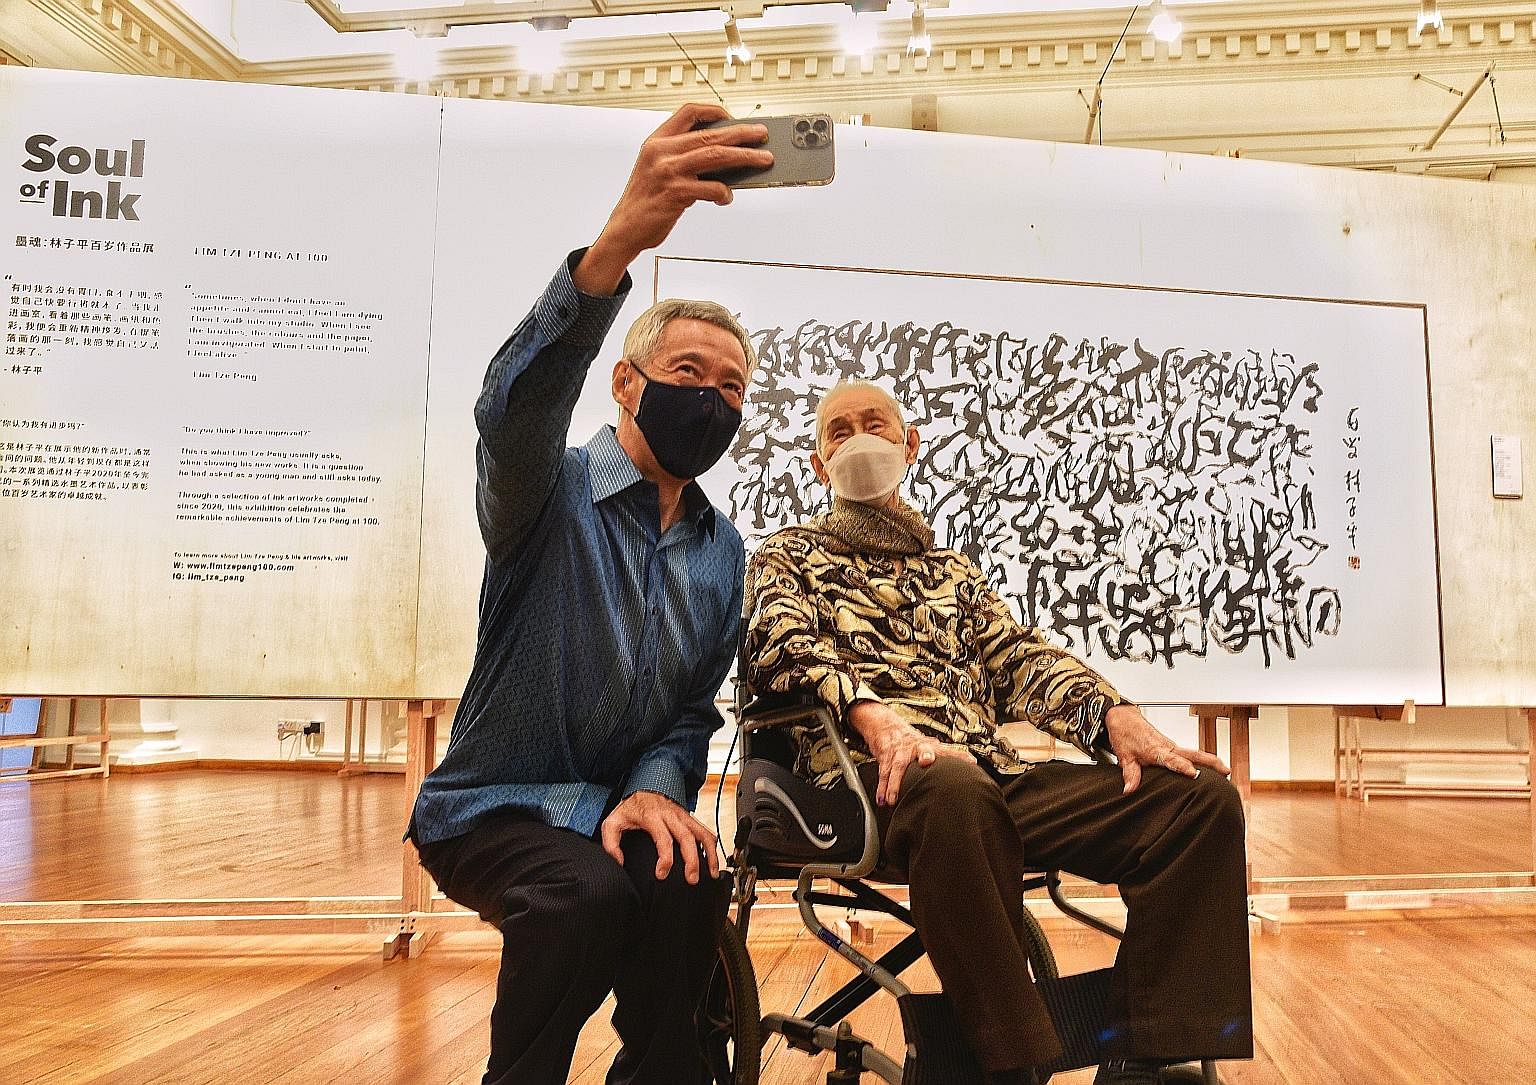 Prime Minister Lee Hsien Loong taking a wefie with pioneer painter and calligrapher Lim Tze Peng at the launch of a book and exhibition on Mr Lim's life and art at The Arts House yesterday. The book, titled Soul Of Ink: Lim Tze Peng At 100, was penne